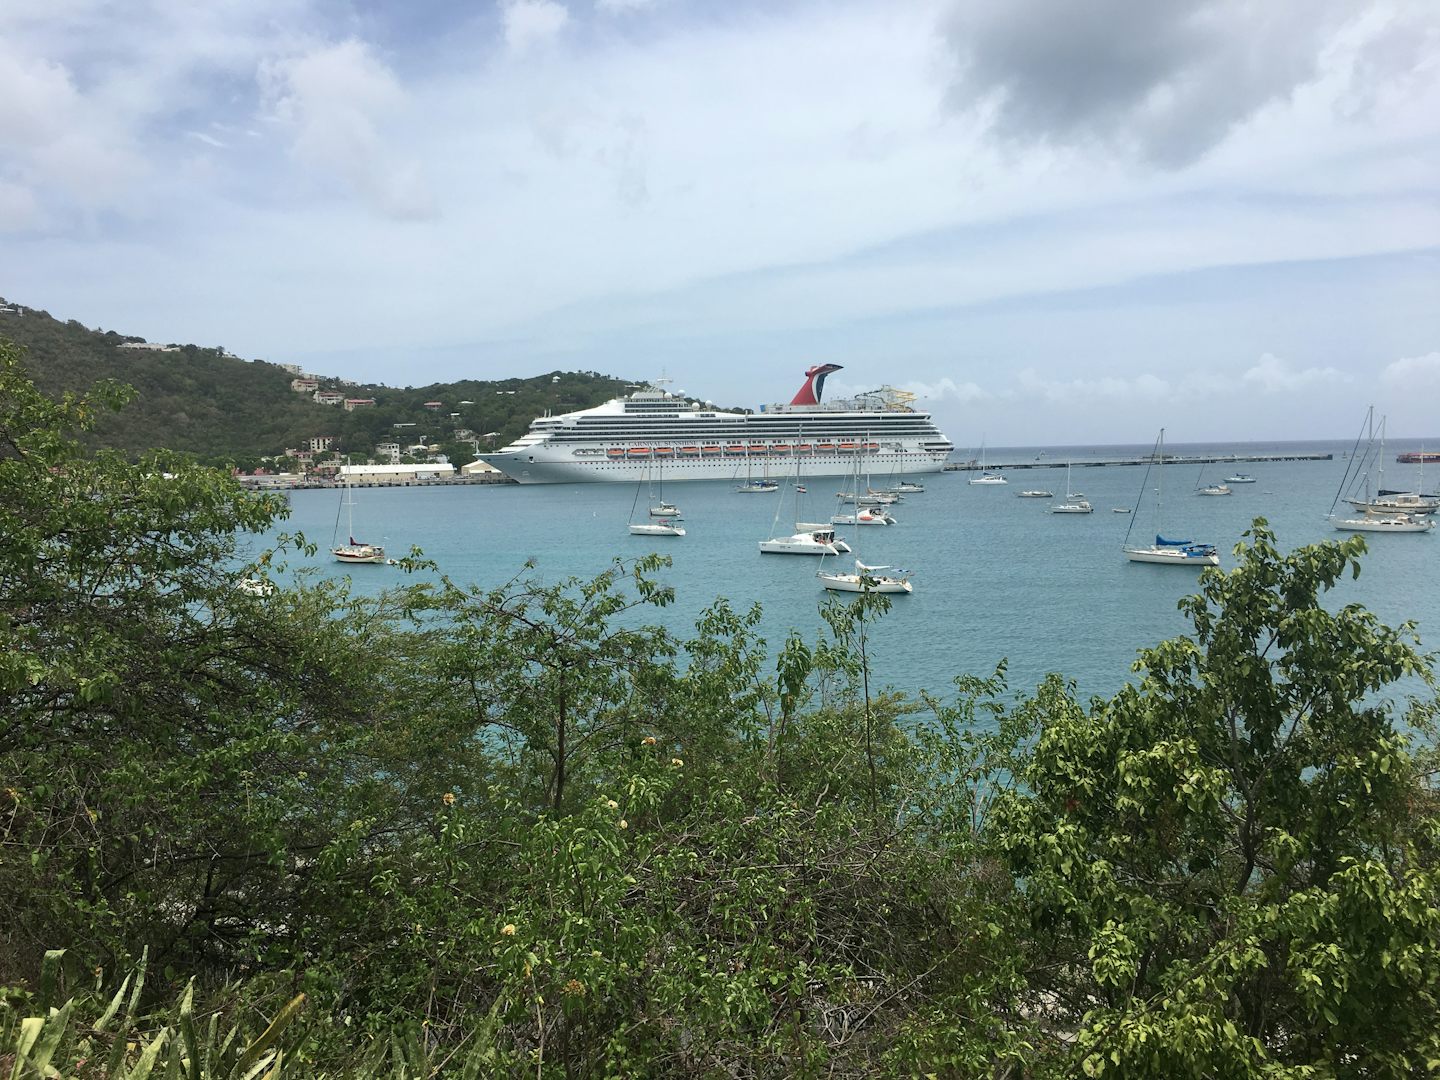 The Carnival Sunshine in St. Thomas.